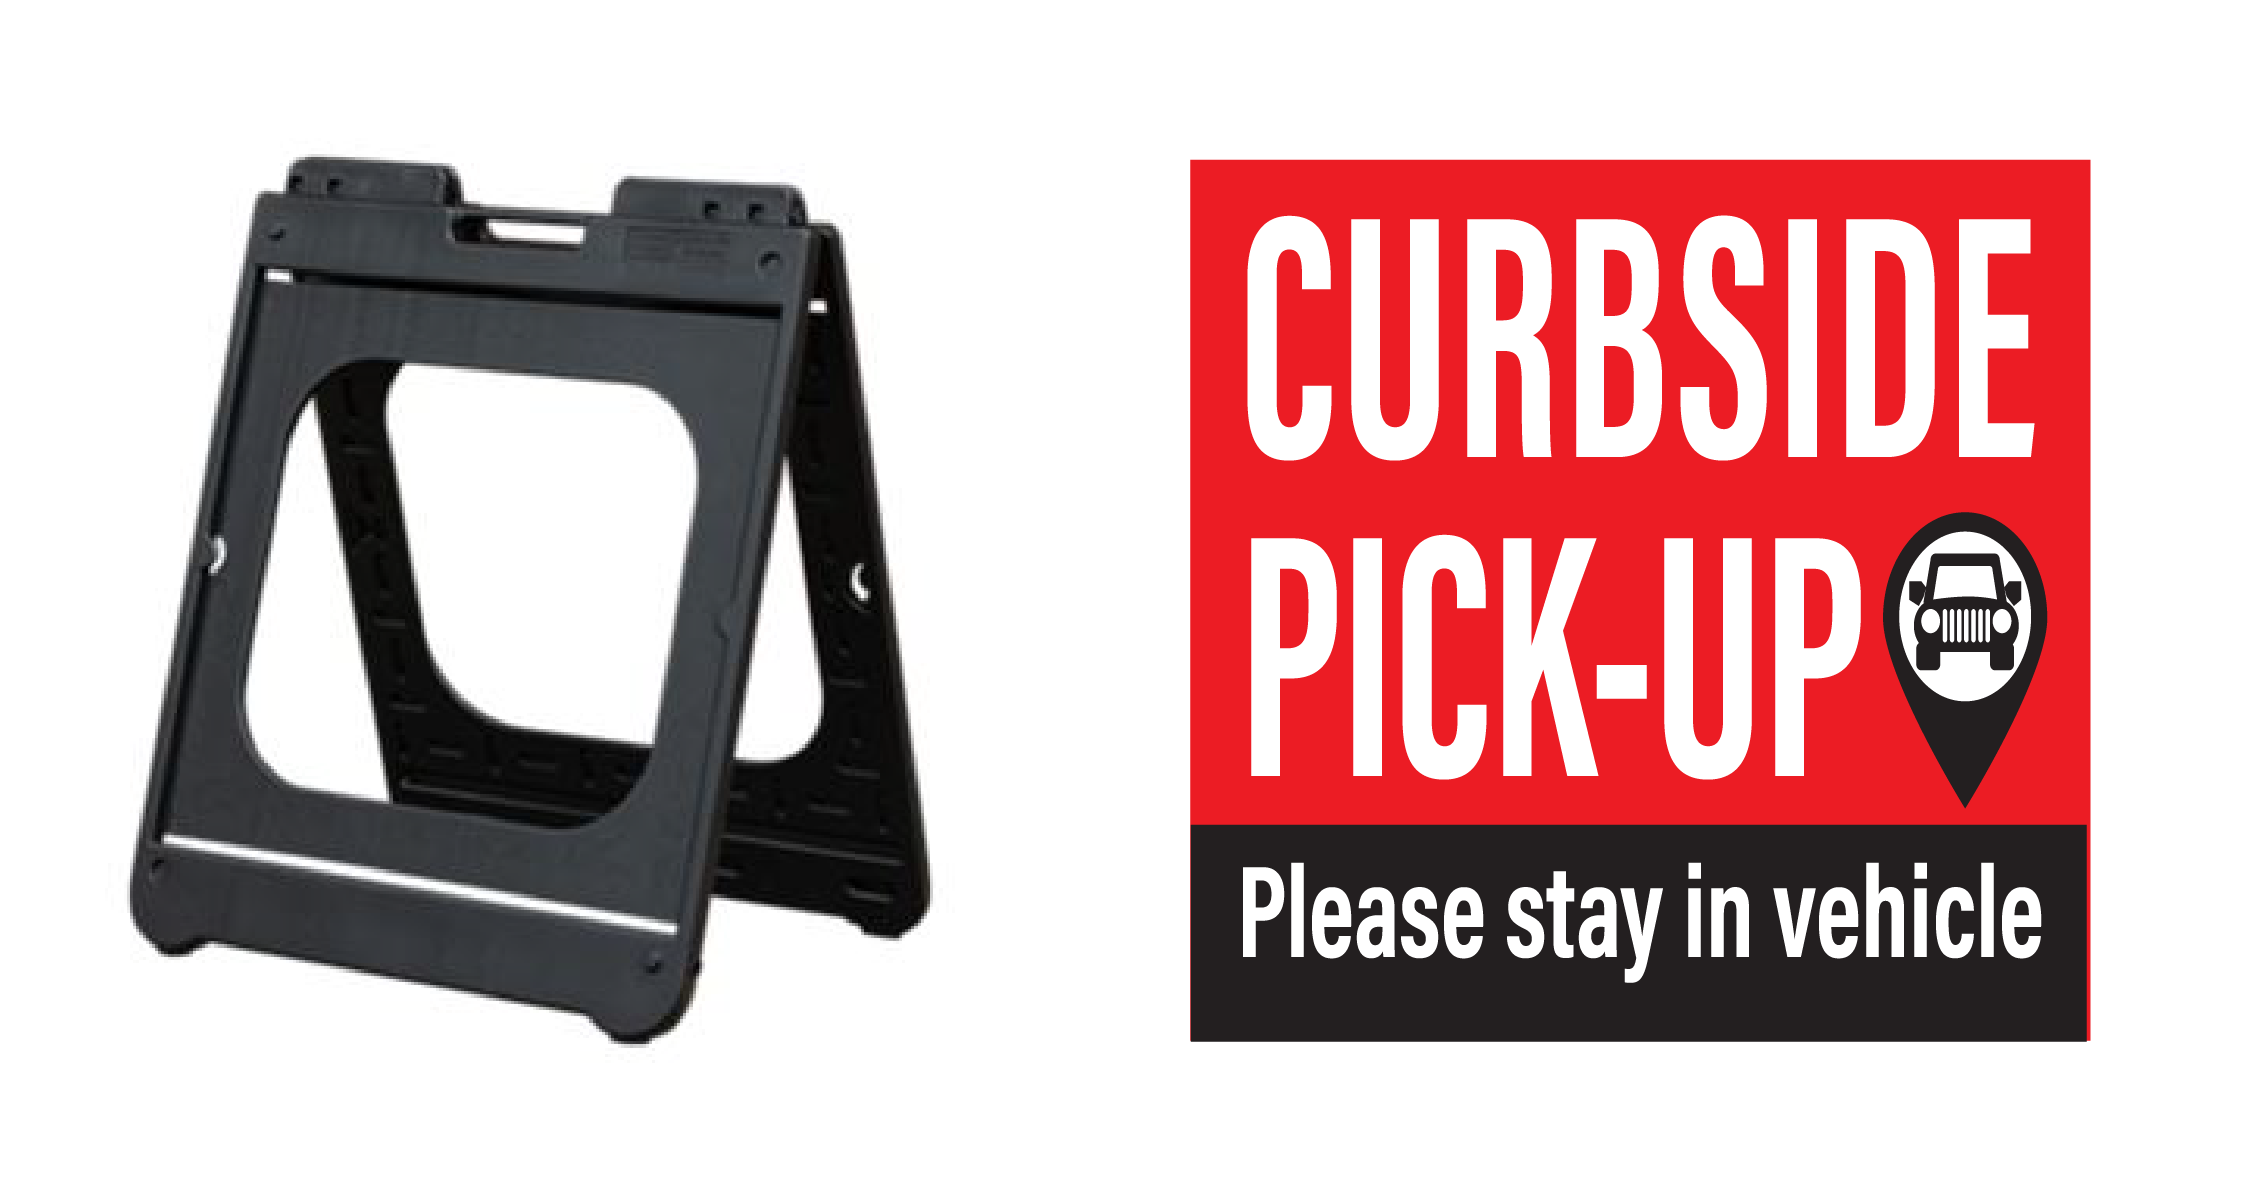 Curbside Pickup Red & Black 24" x 24" A-Frame w/ 2 Inserts and an Arrow for the Top